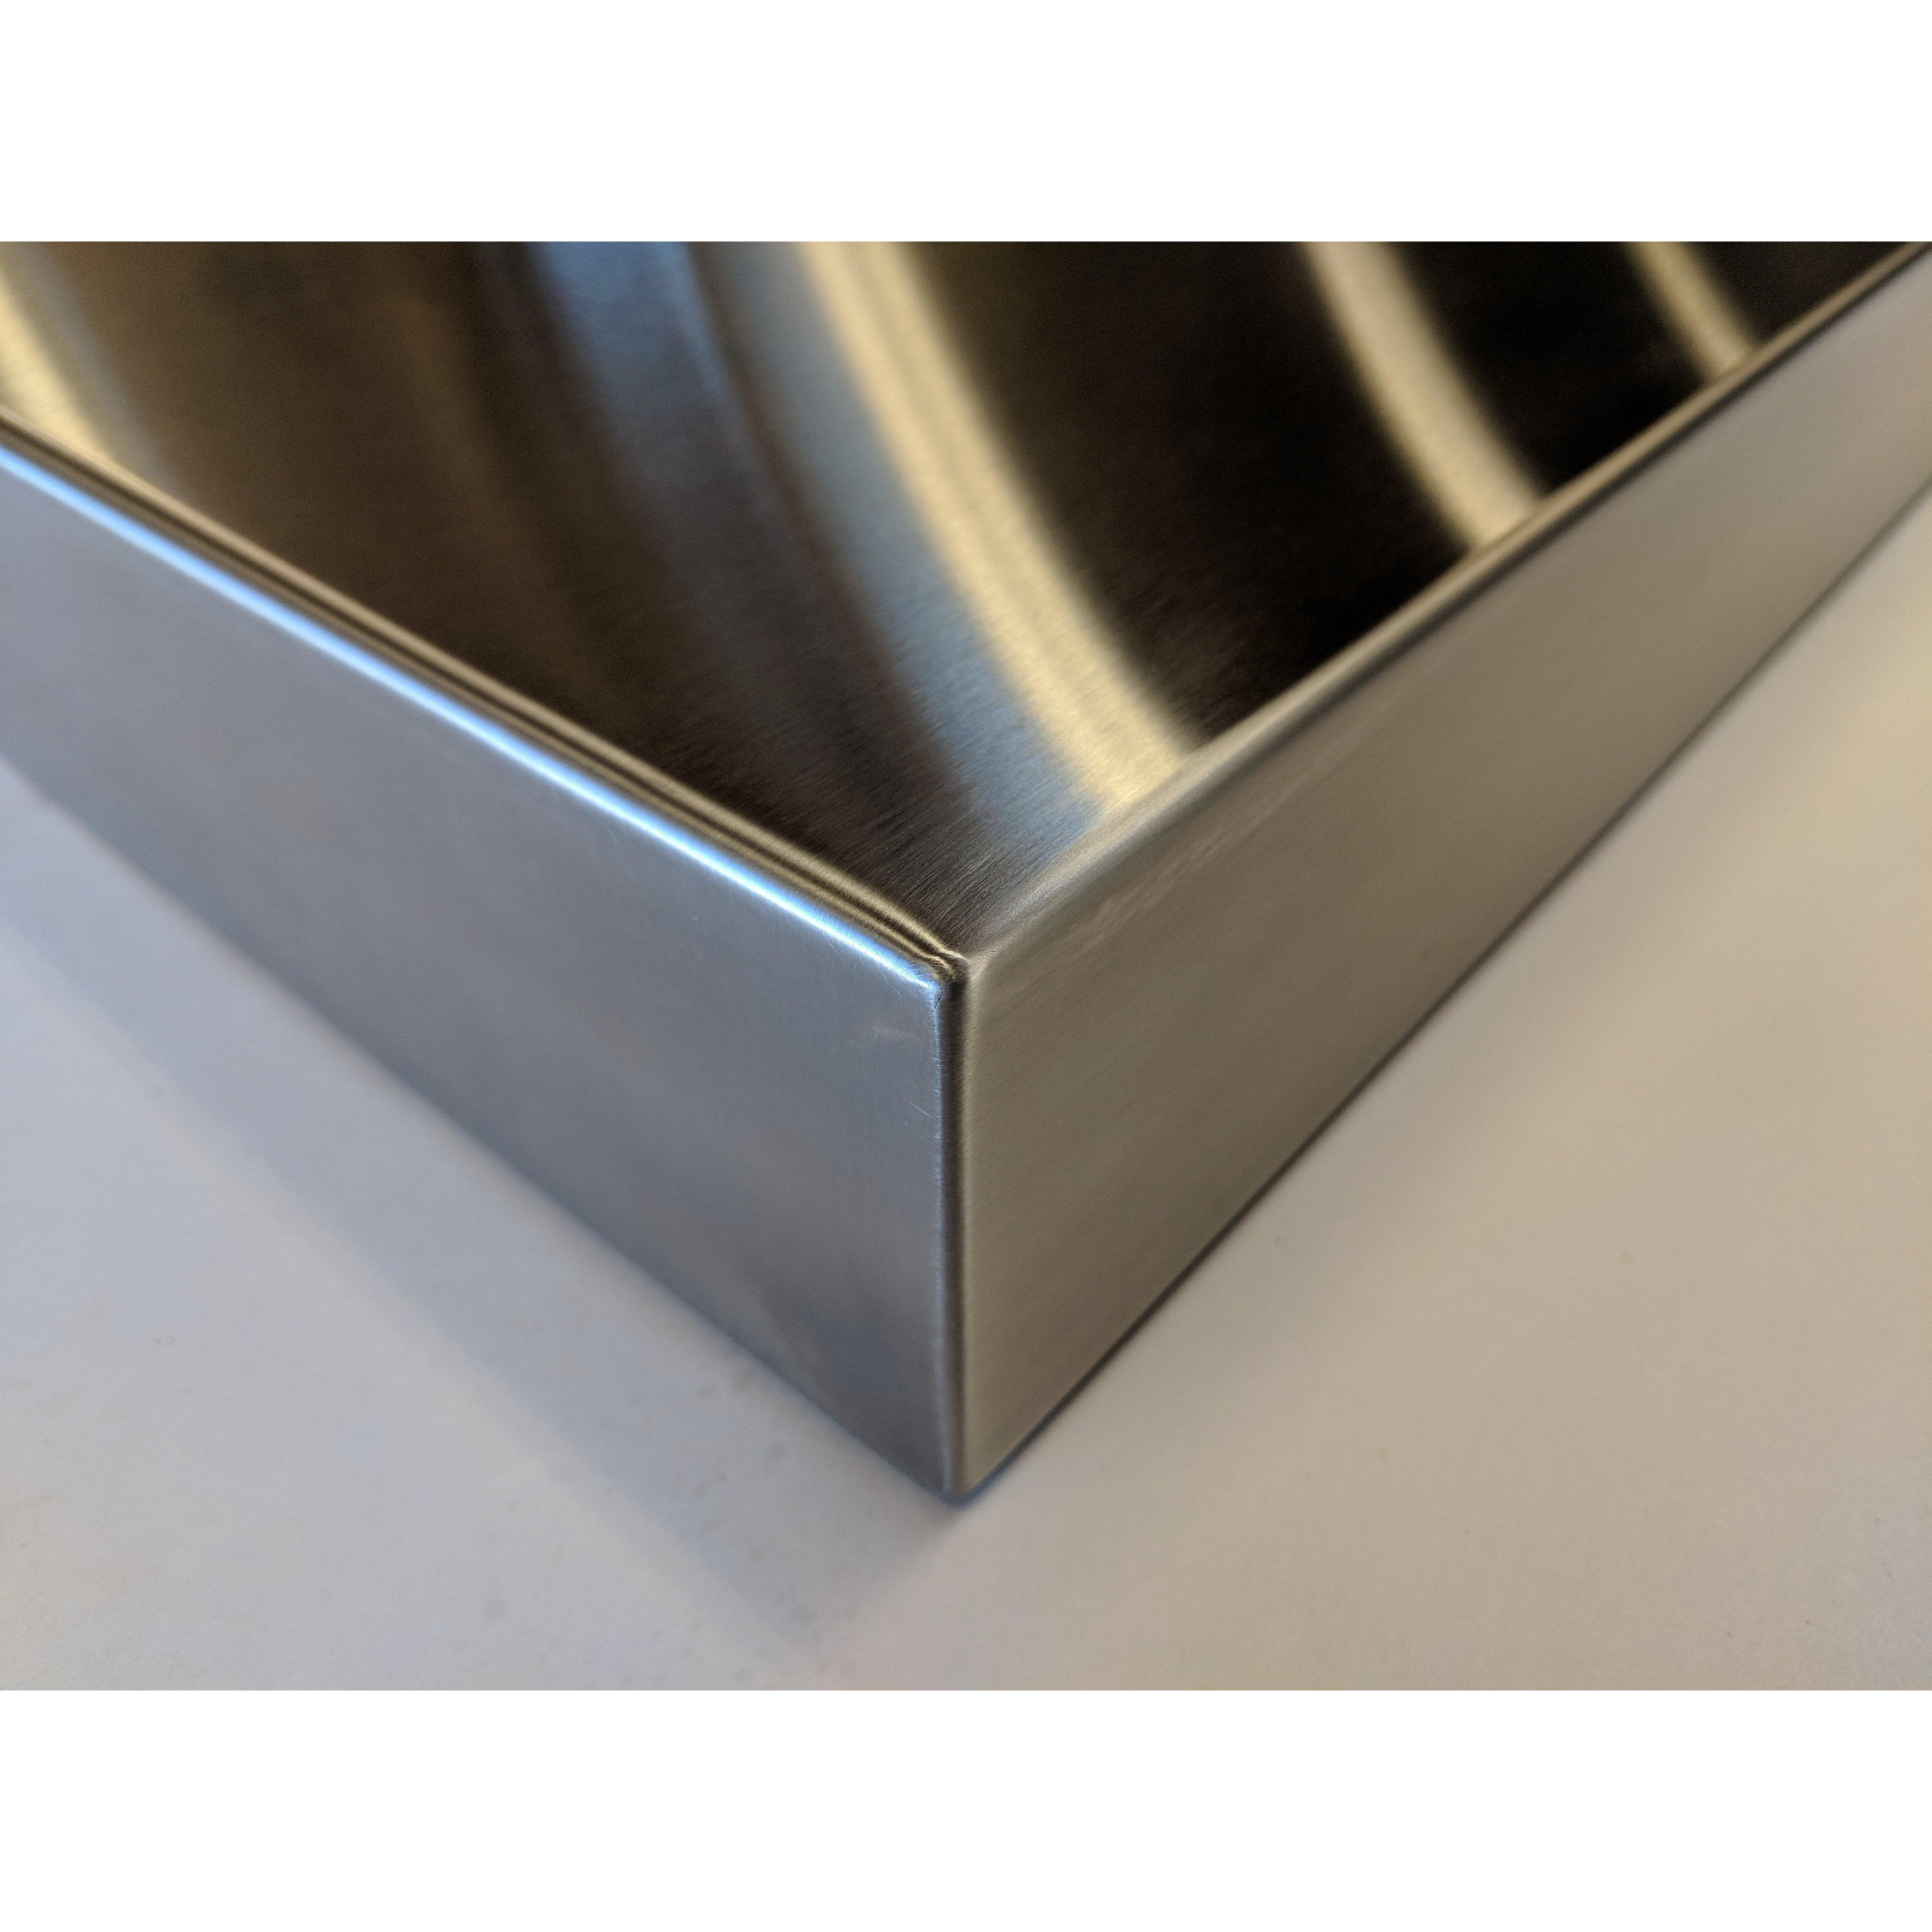 16 GA Stainless Steel Wall Shelves - 16 Wide